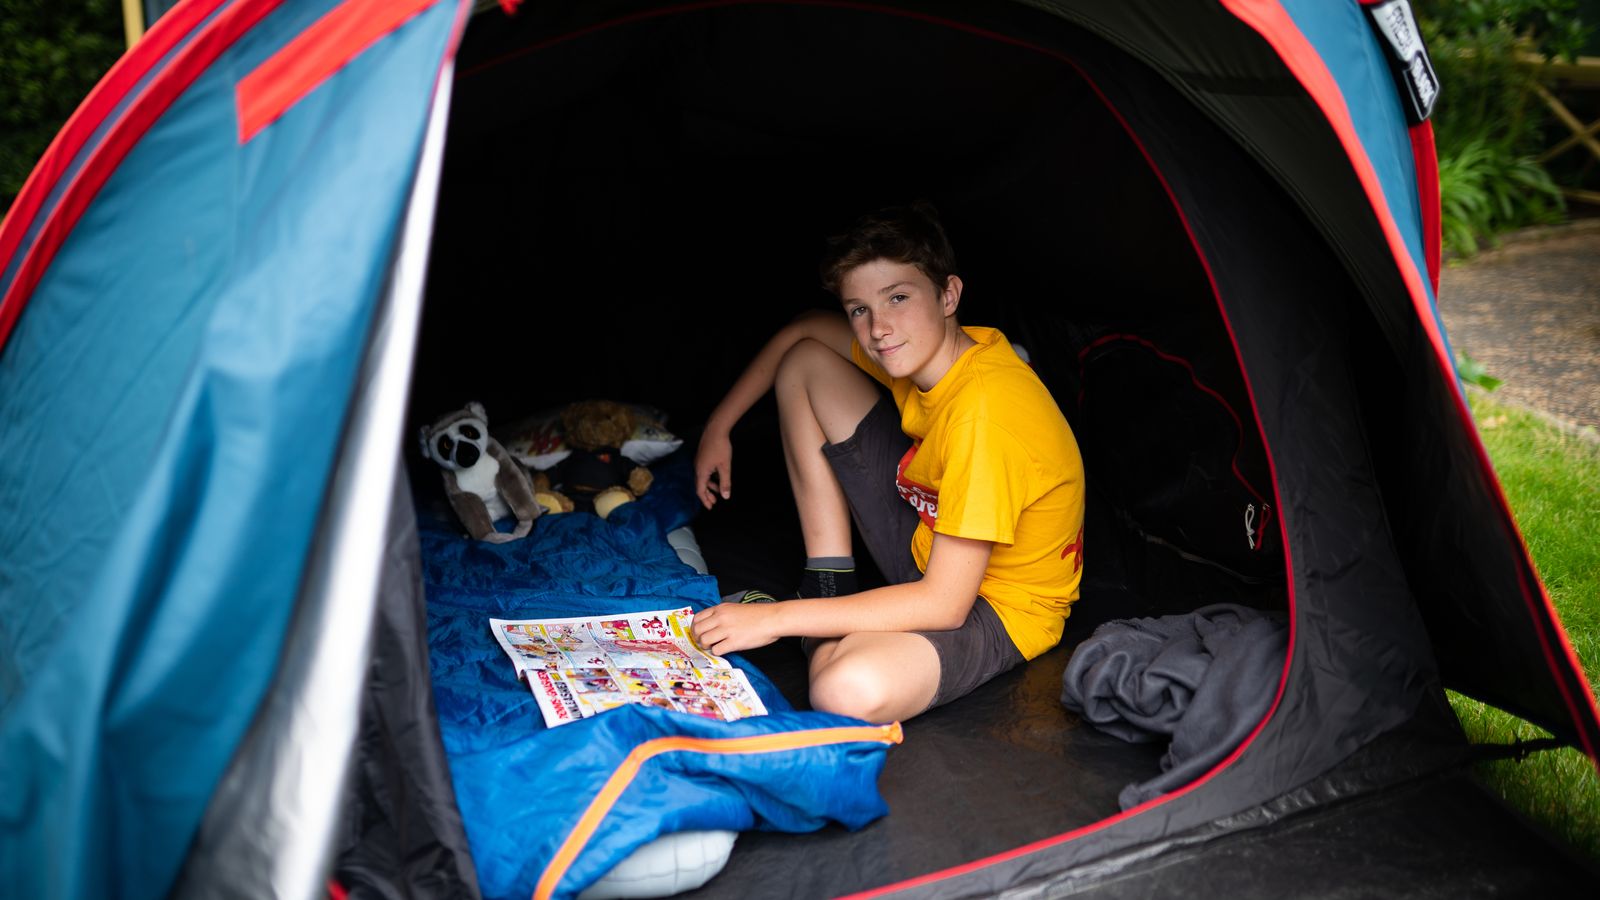 'Boy in the tent' among 850 charity and community representatives invited to the King's coronation